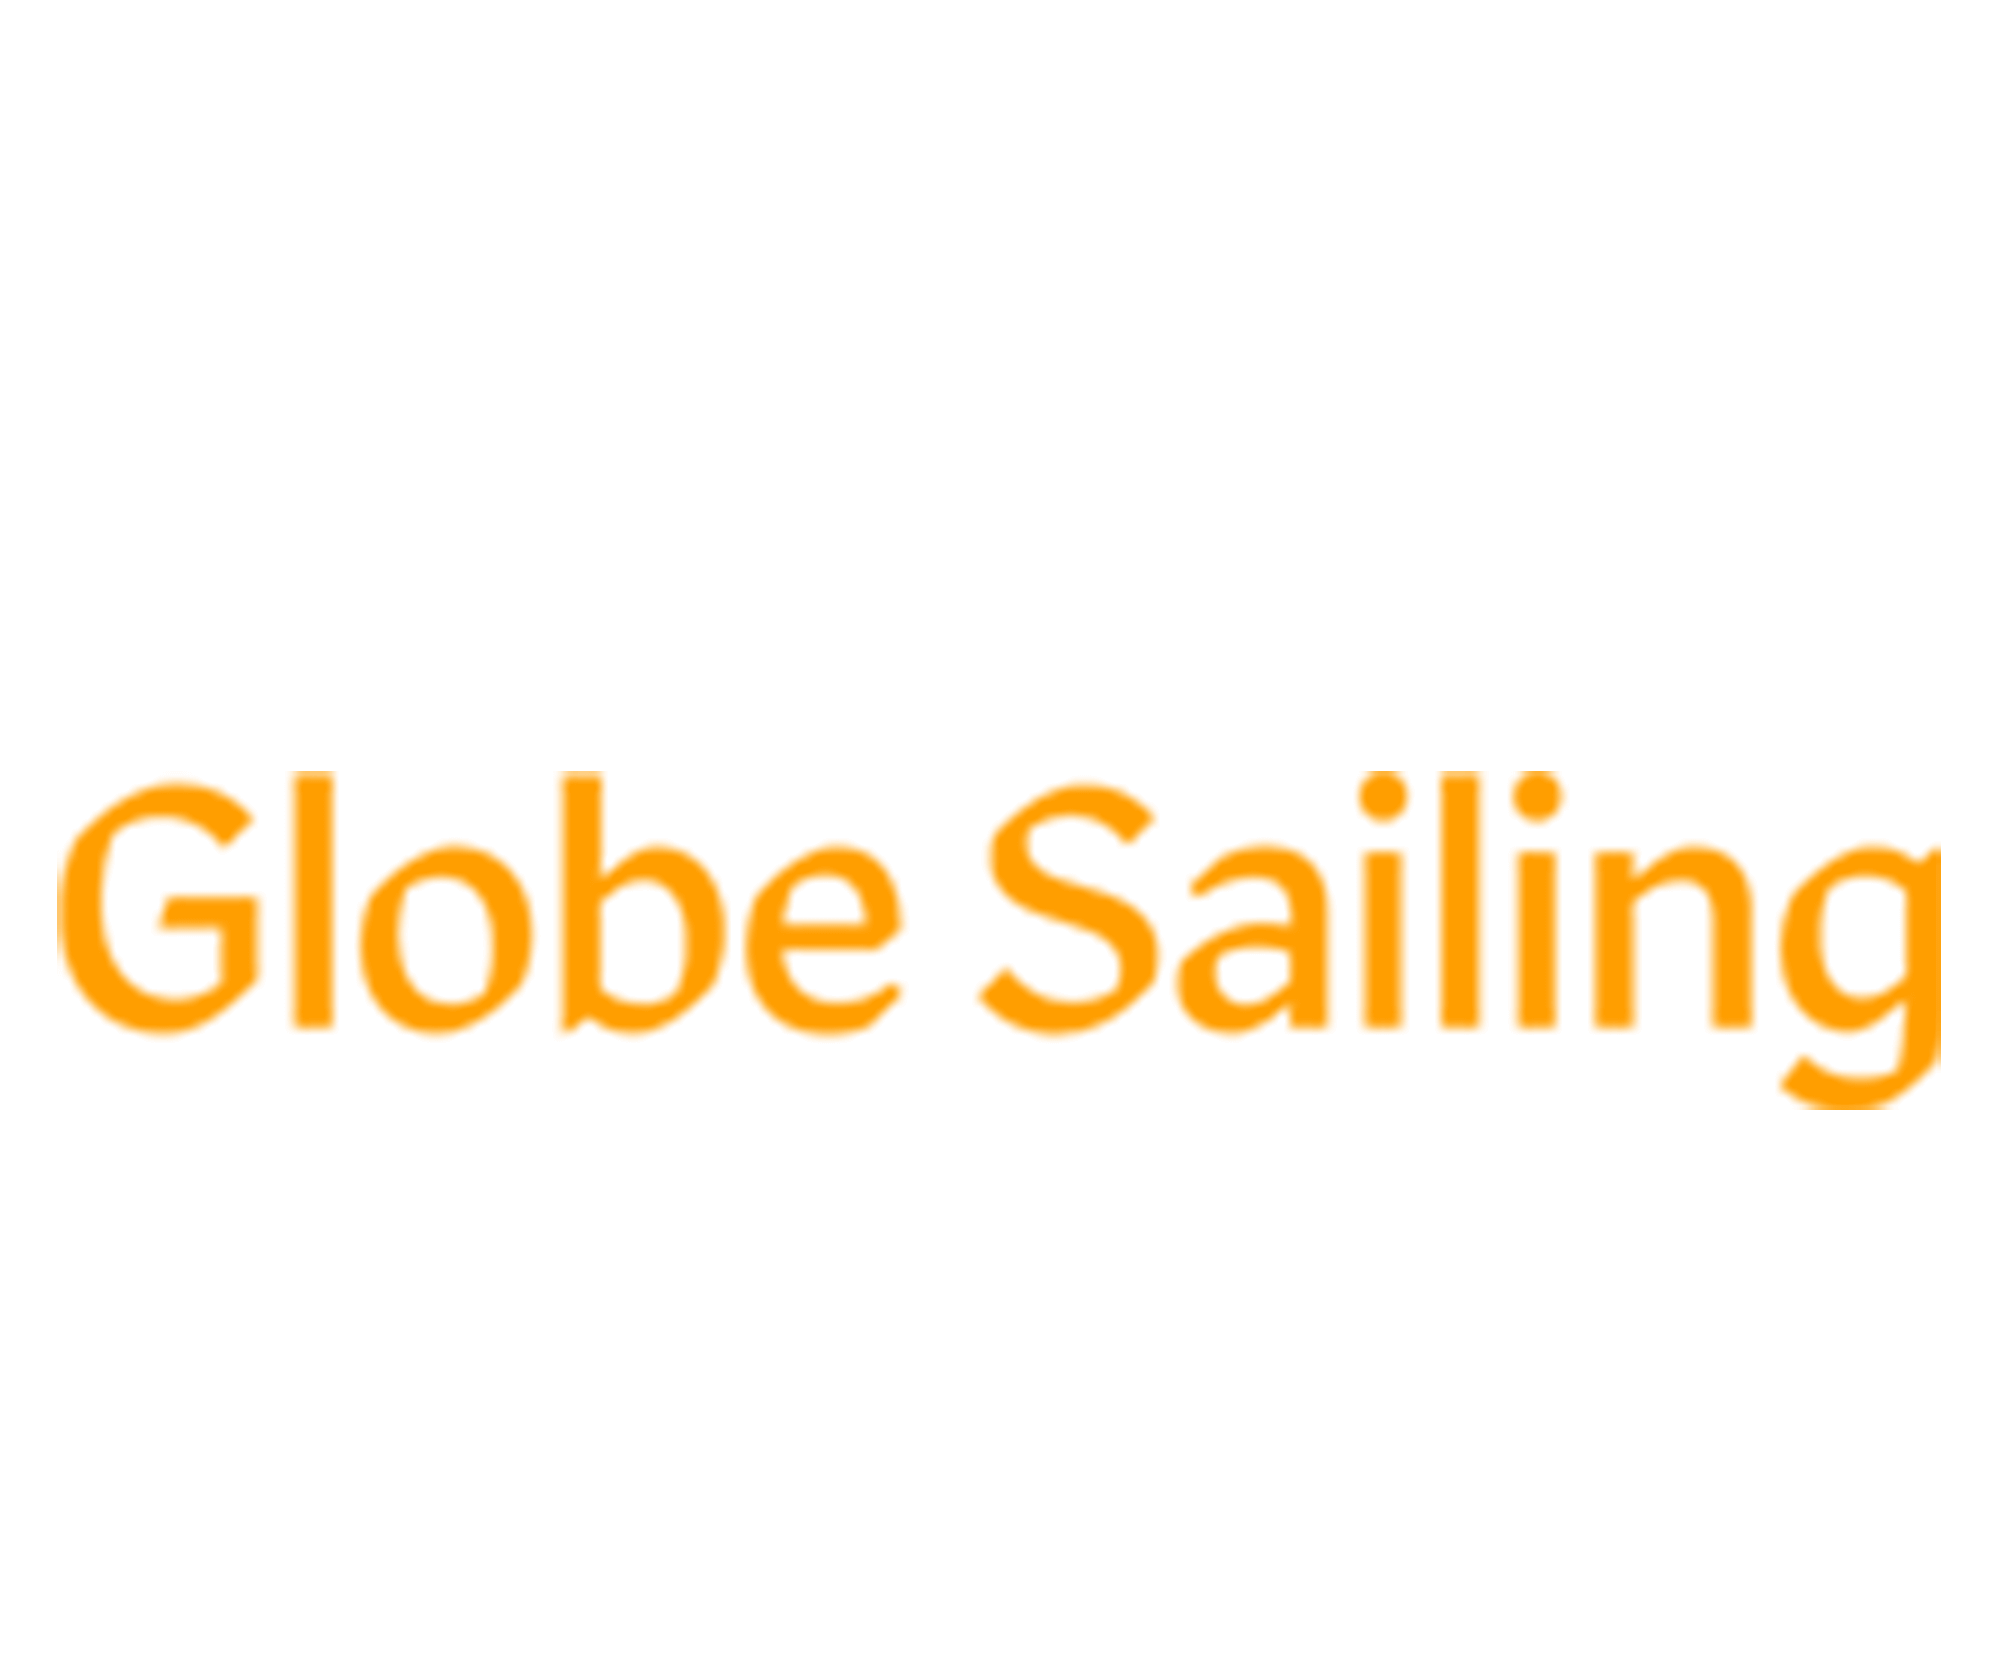 Located in South America, Globe Sailing collaborate closely with us.